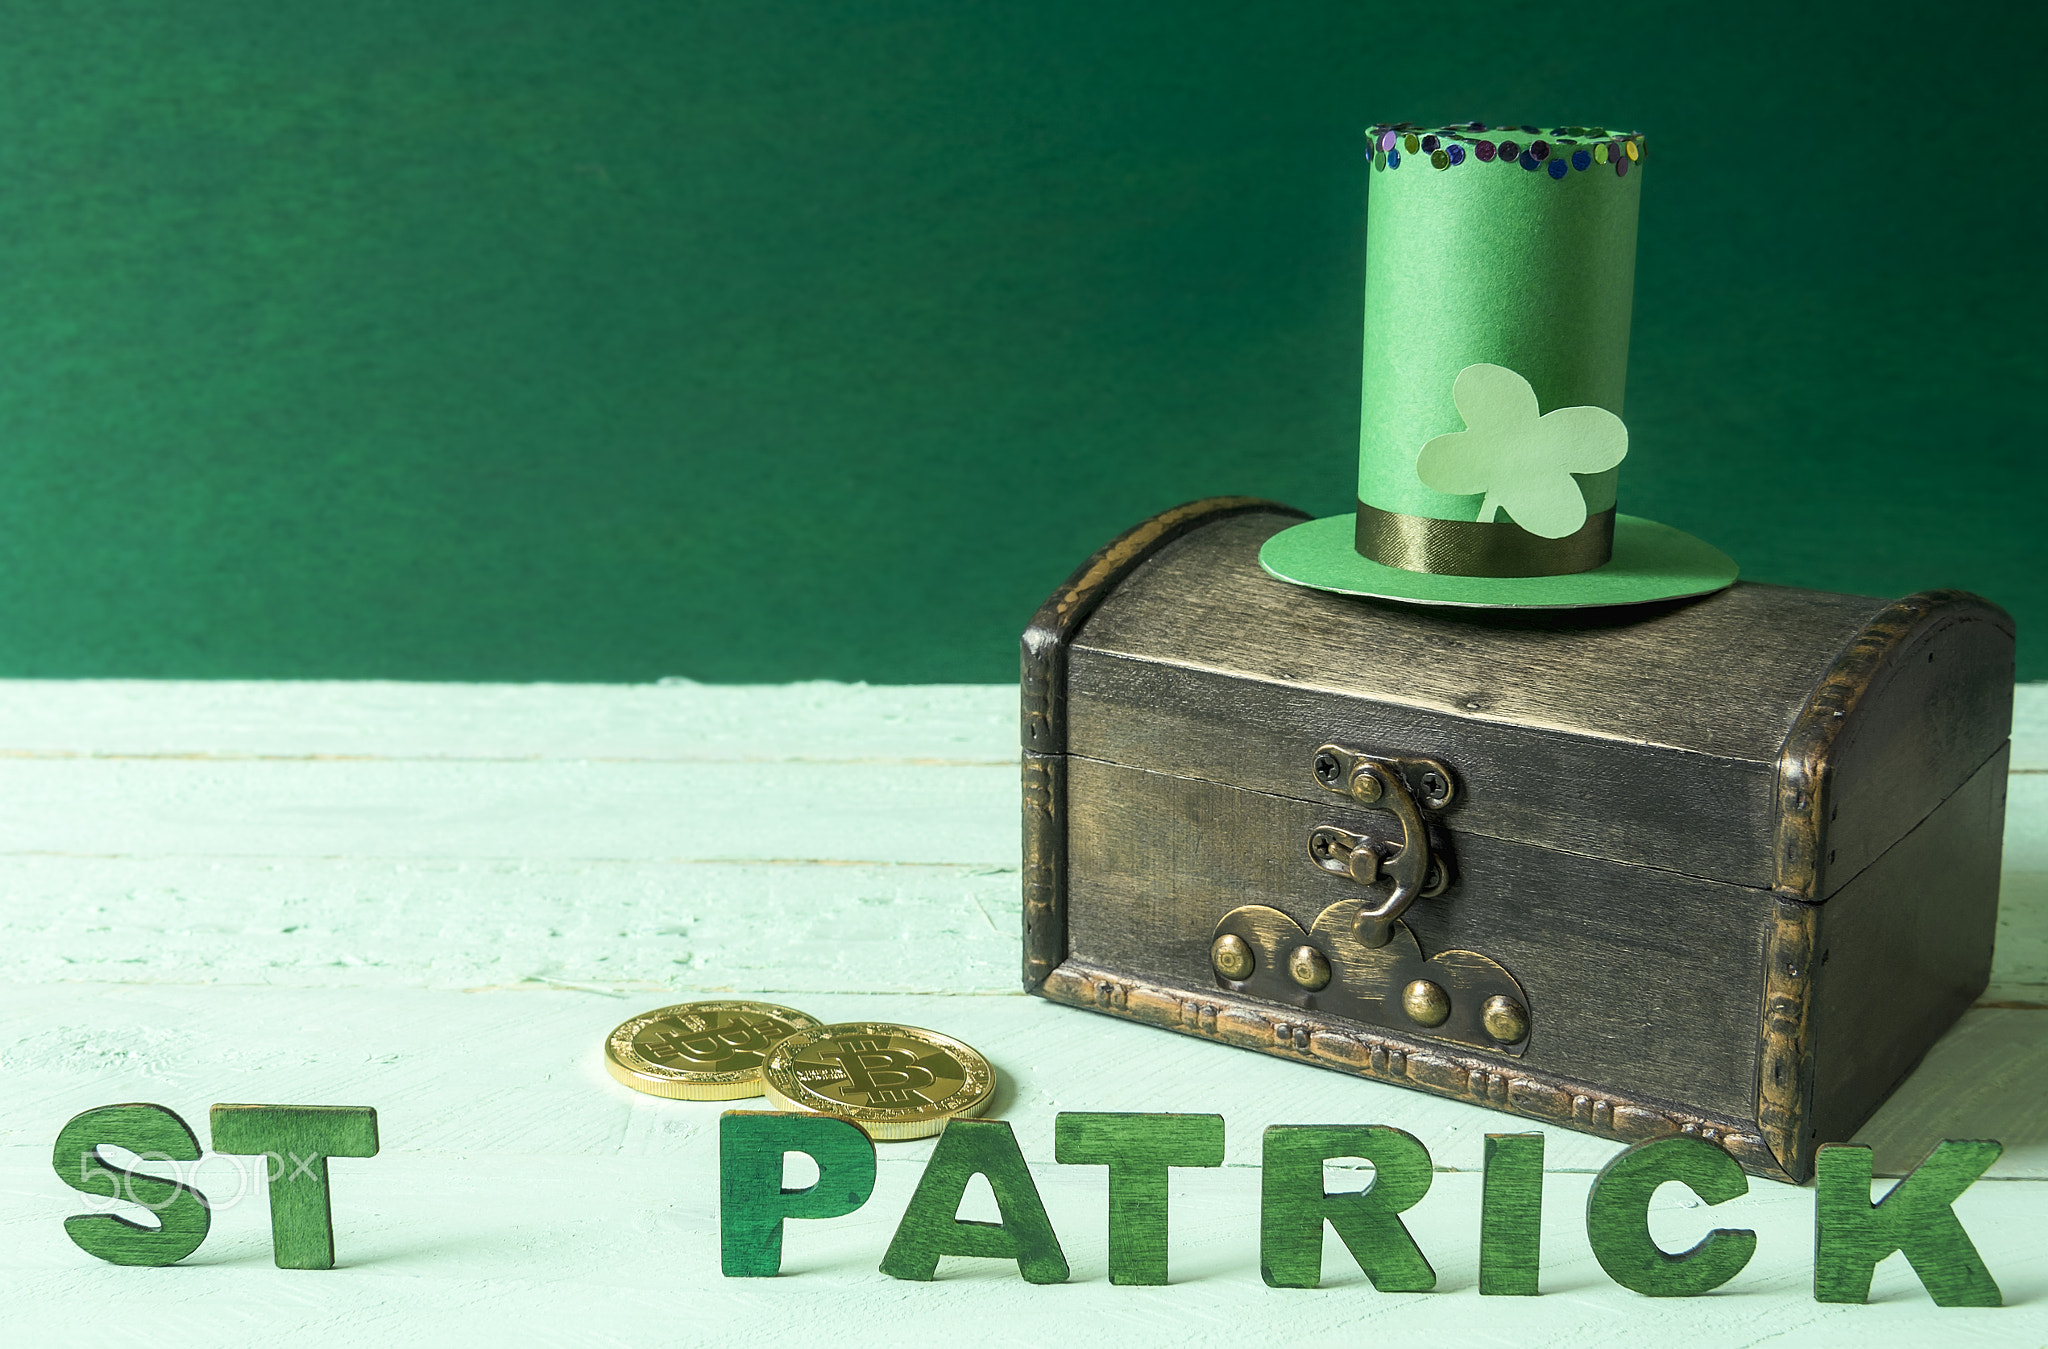 St Patrick words and hat on a treasure chest